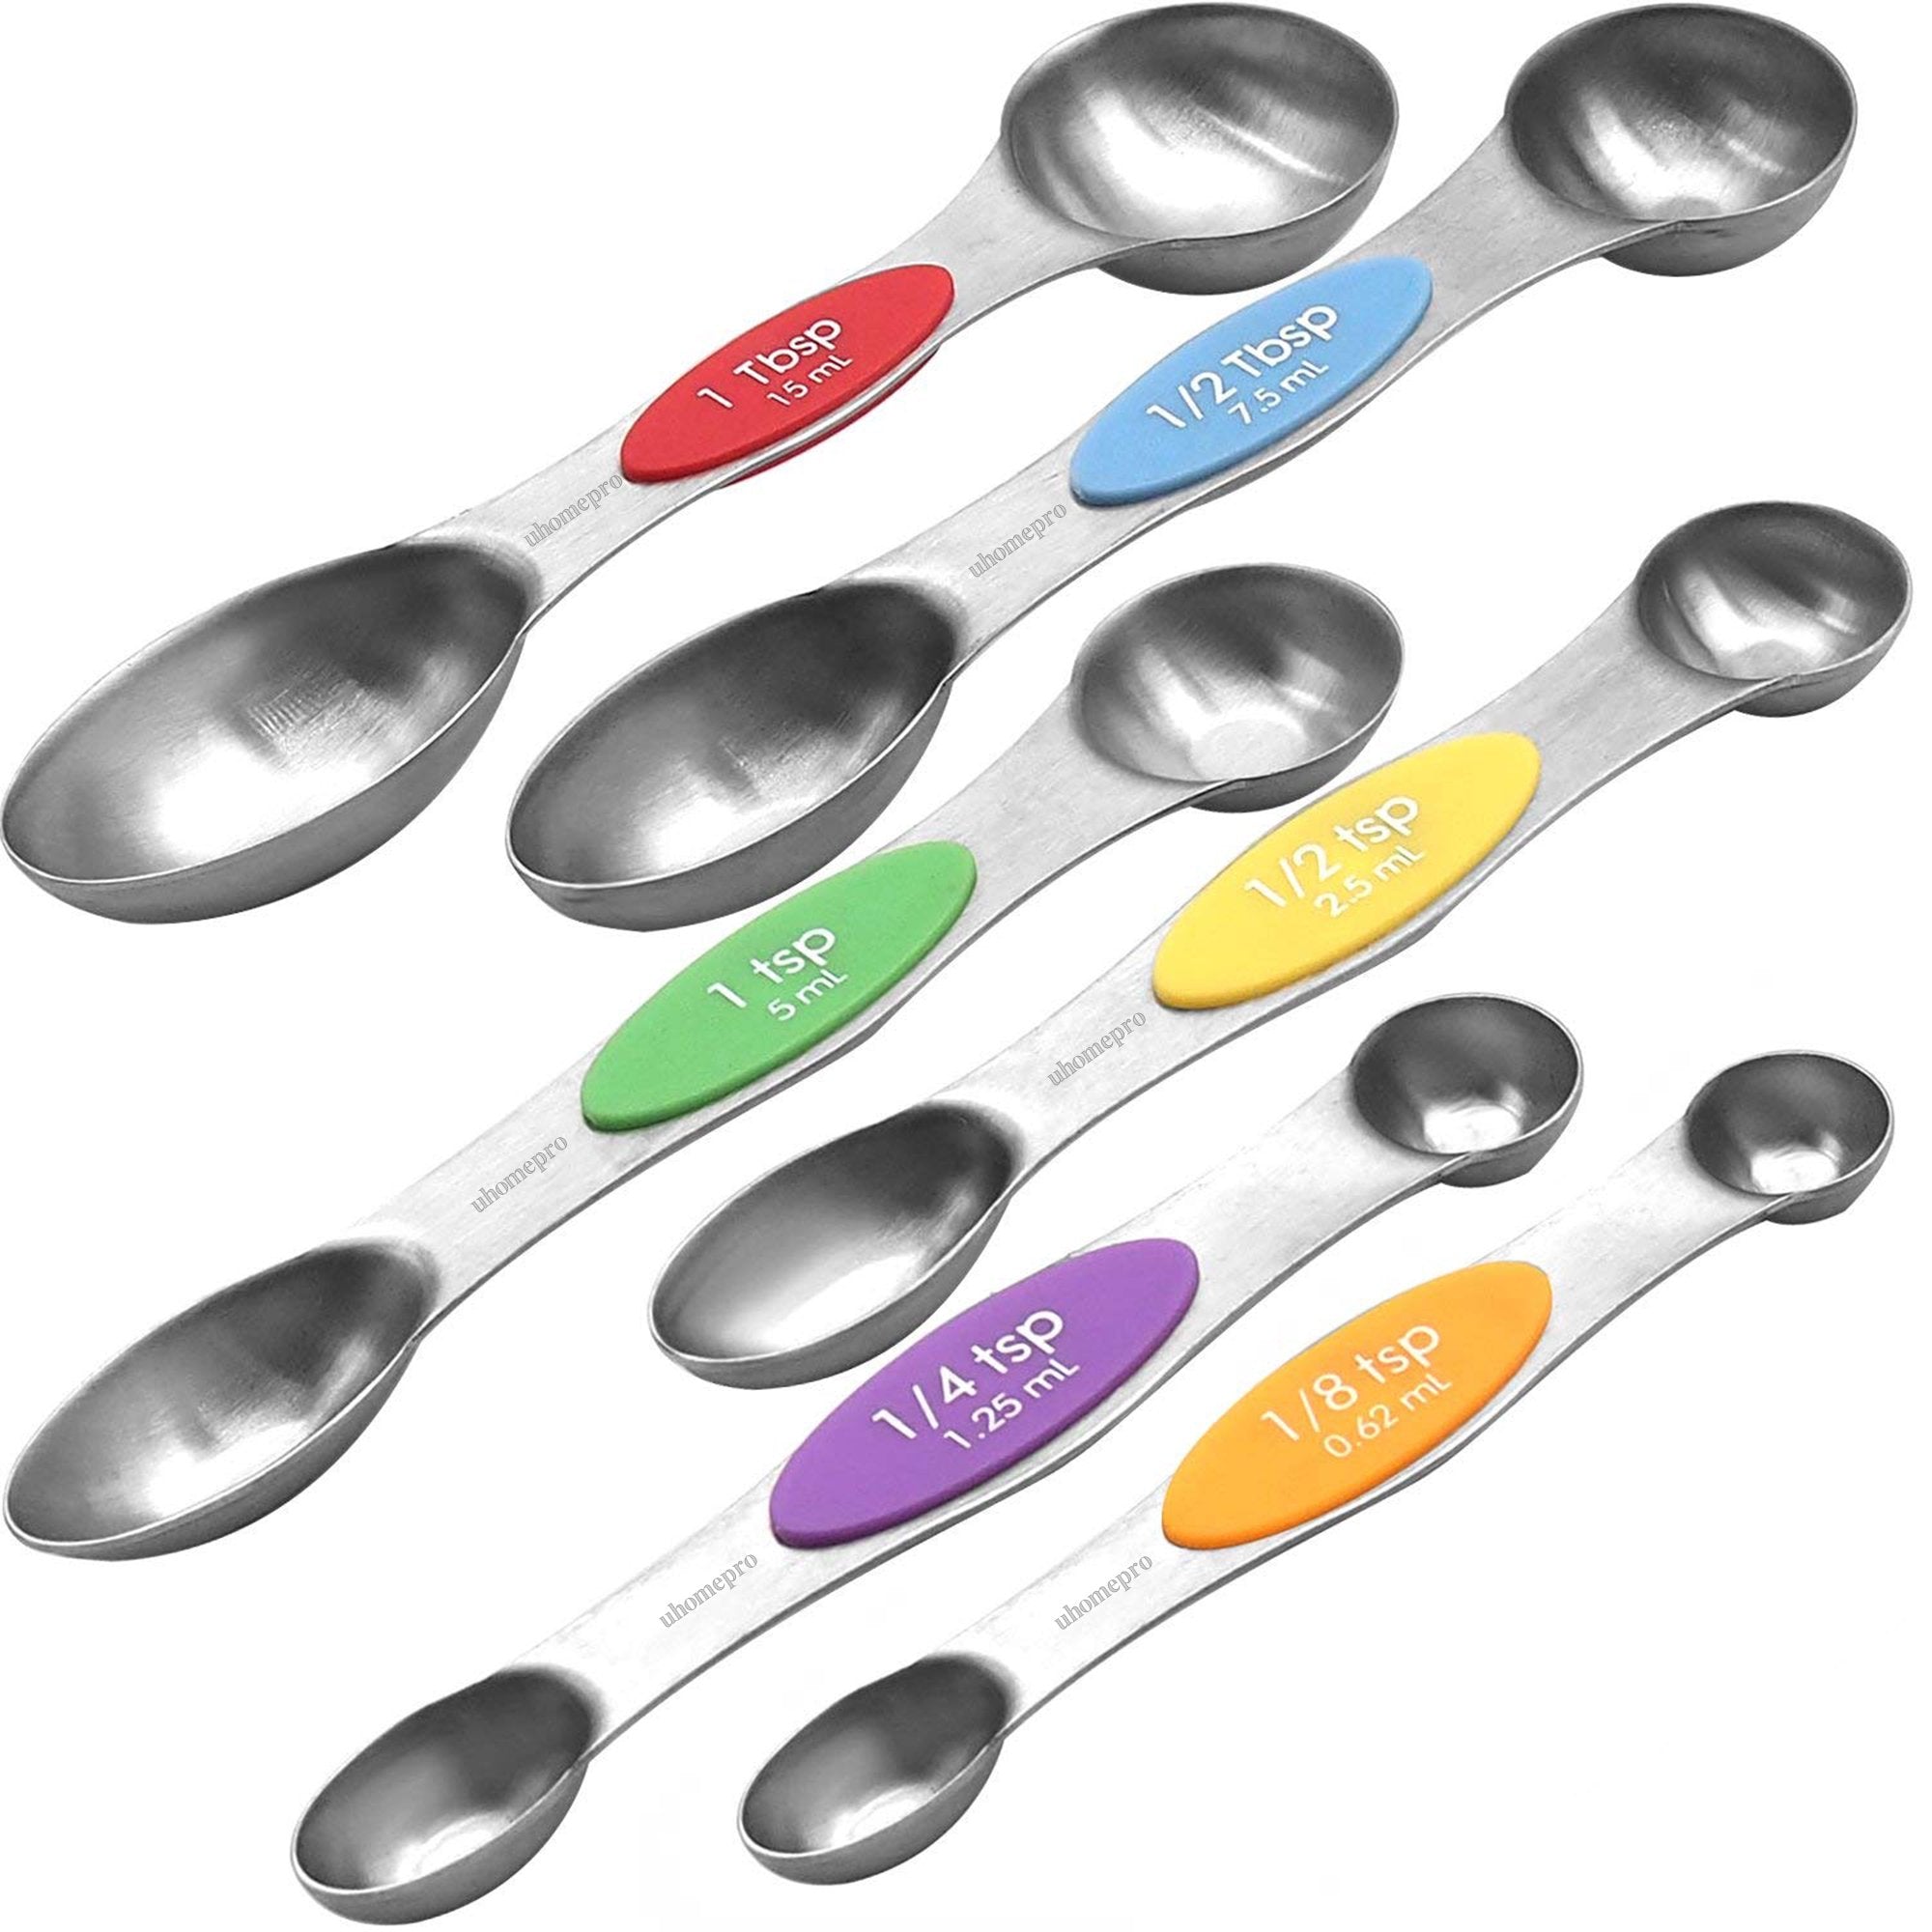 Measuring Spoons Set, Set of 7 TSP Measuring Spoon Stainless Steel  Teaspoons Tablespoons Measure Spoon Set with Metric and US Measurements for  Dry and